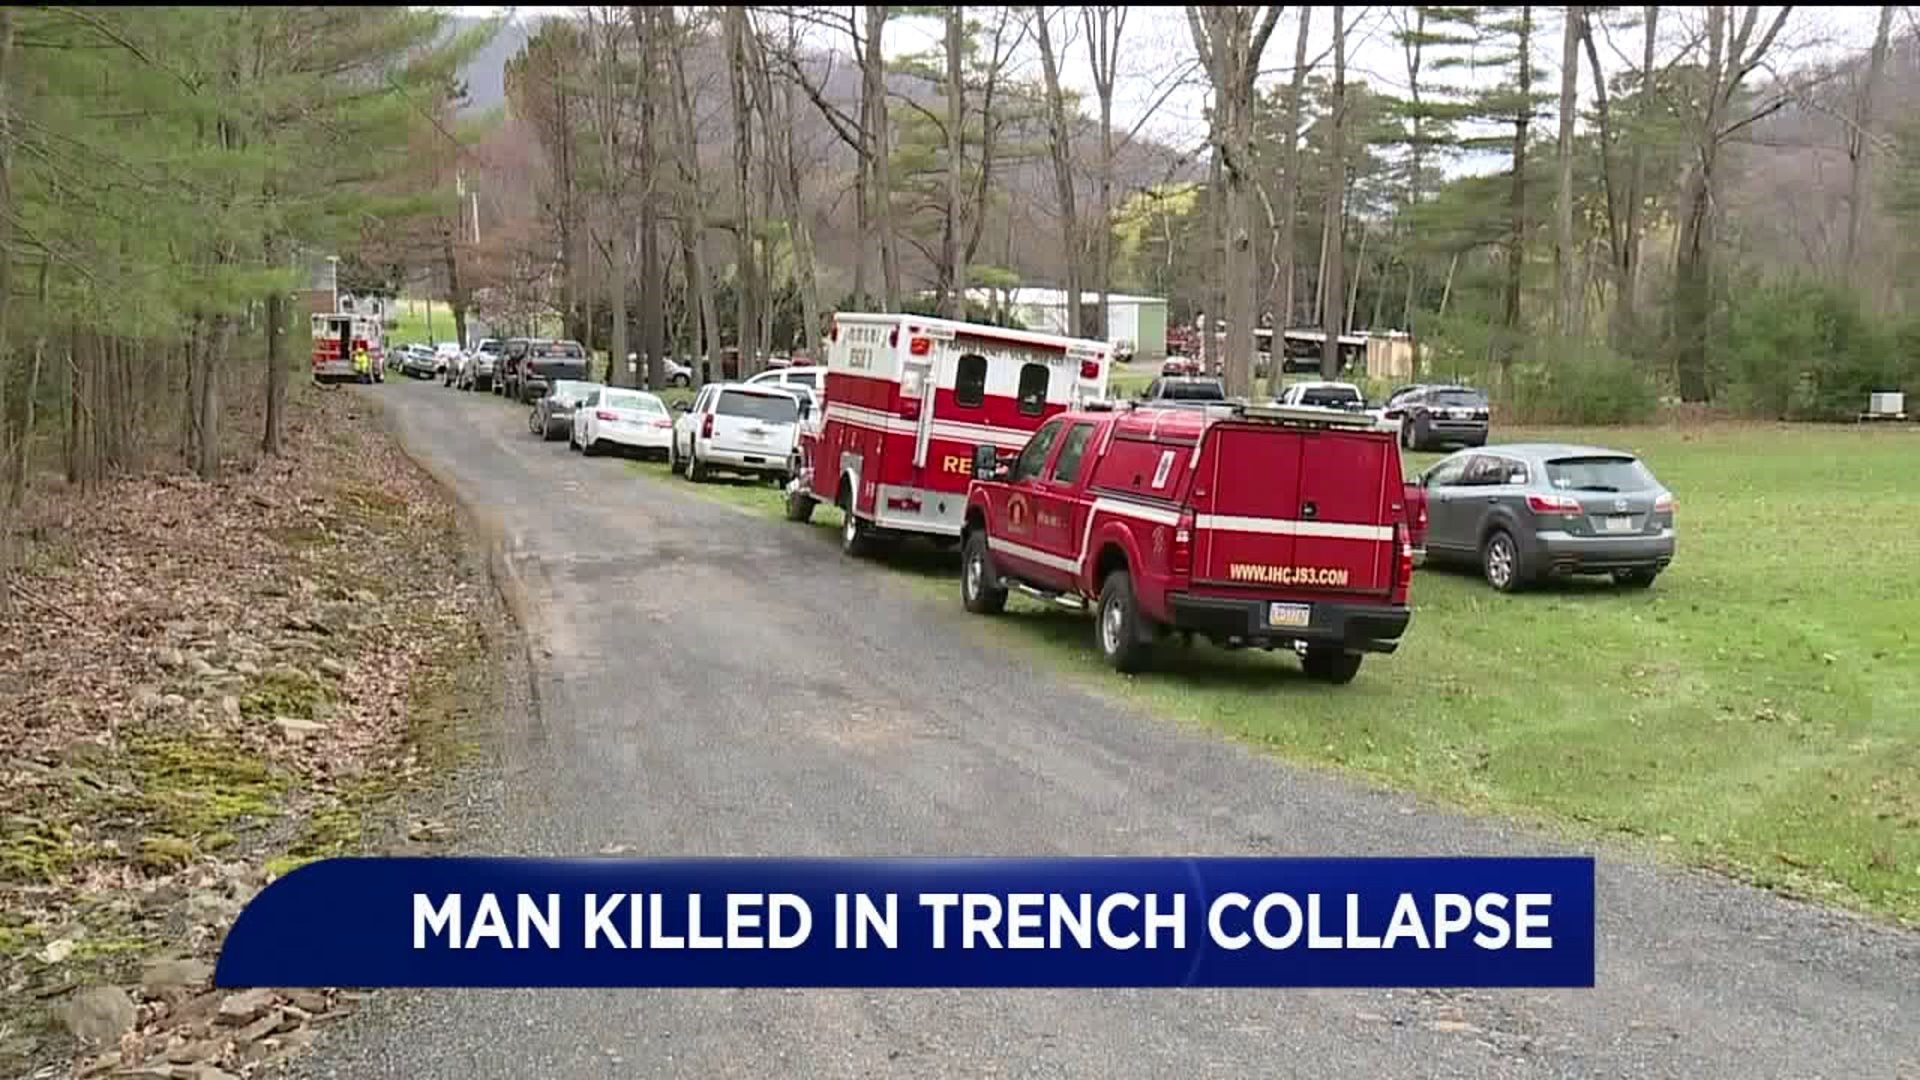 Man Killed in Trench Collapse